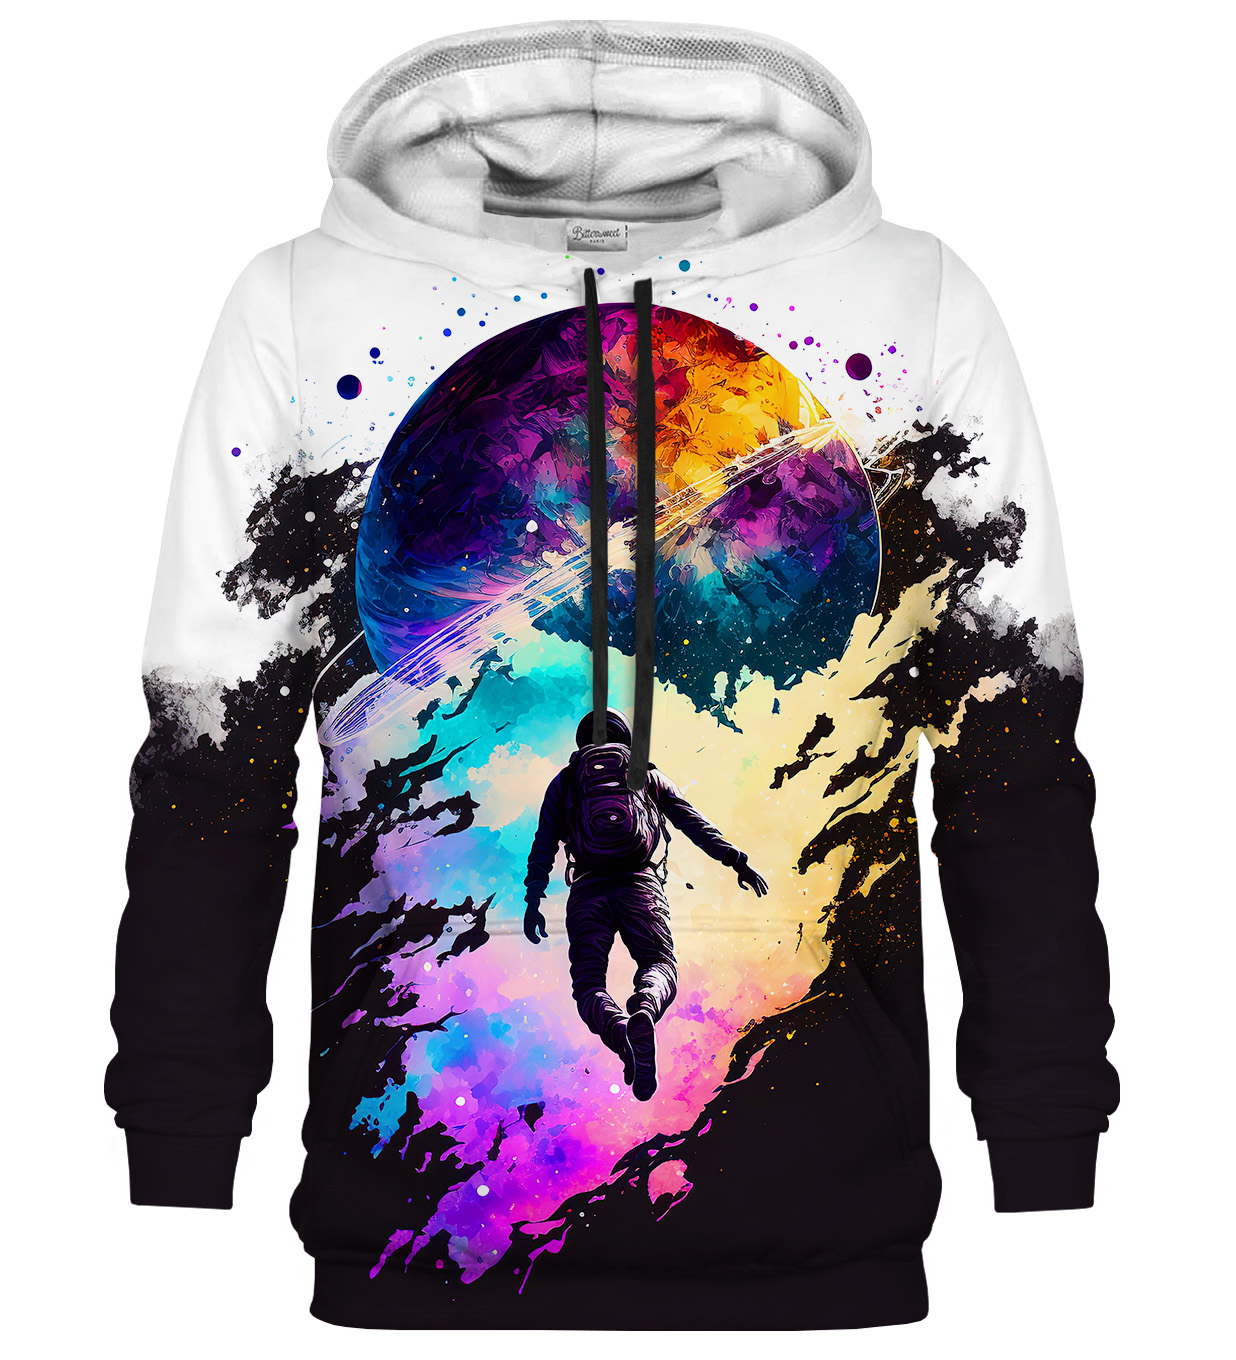 Searching For Colors Hoodie - S